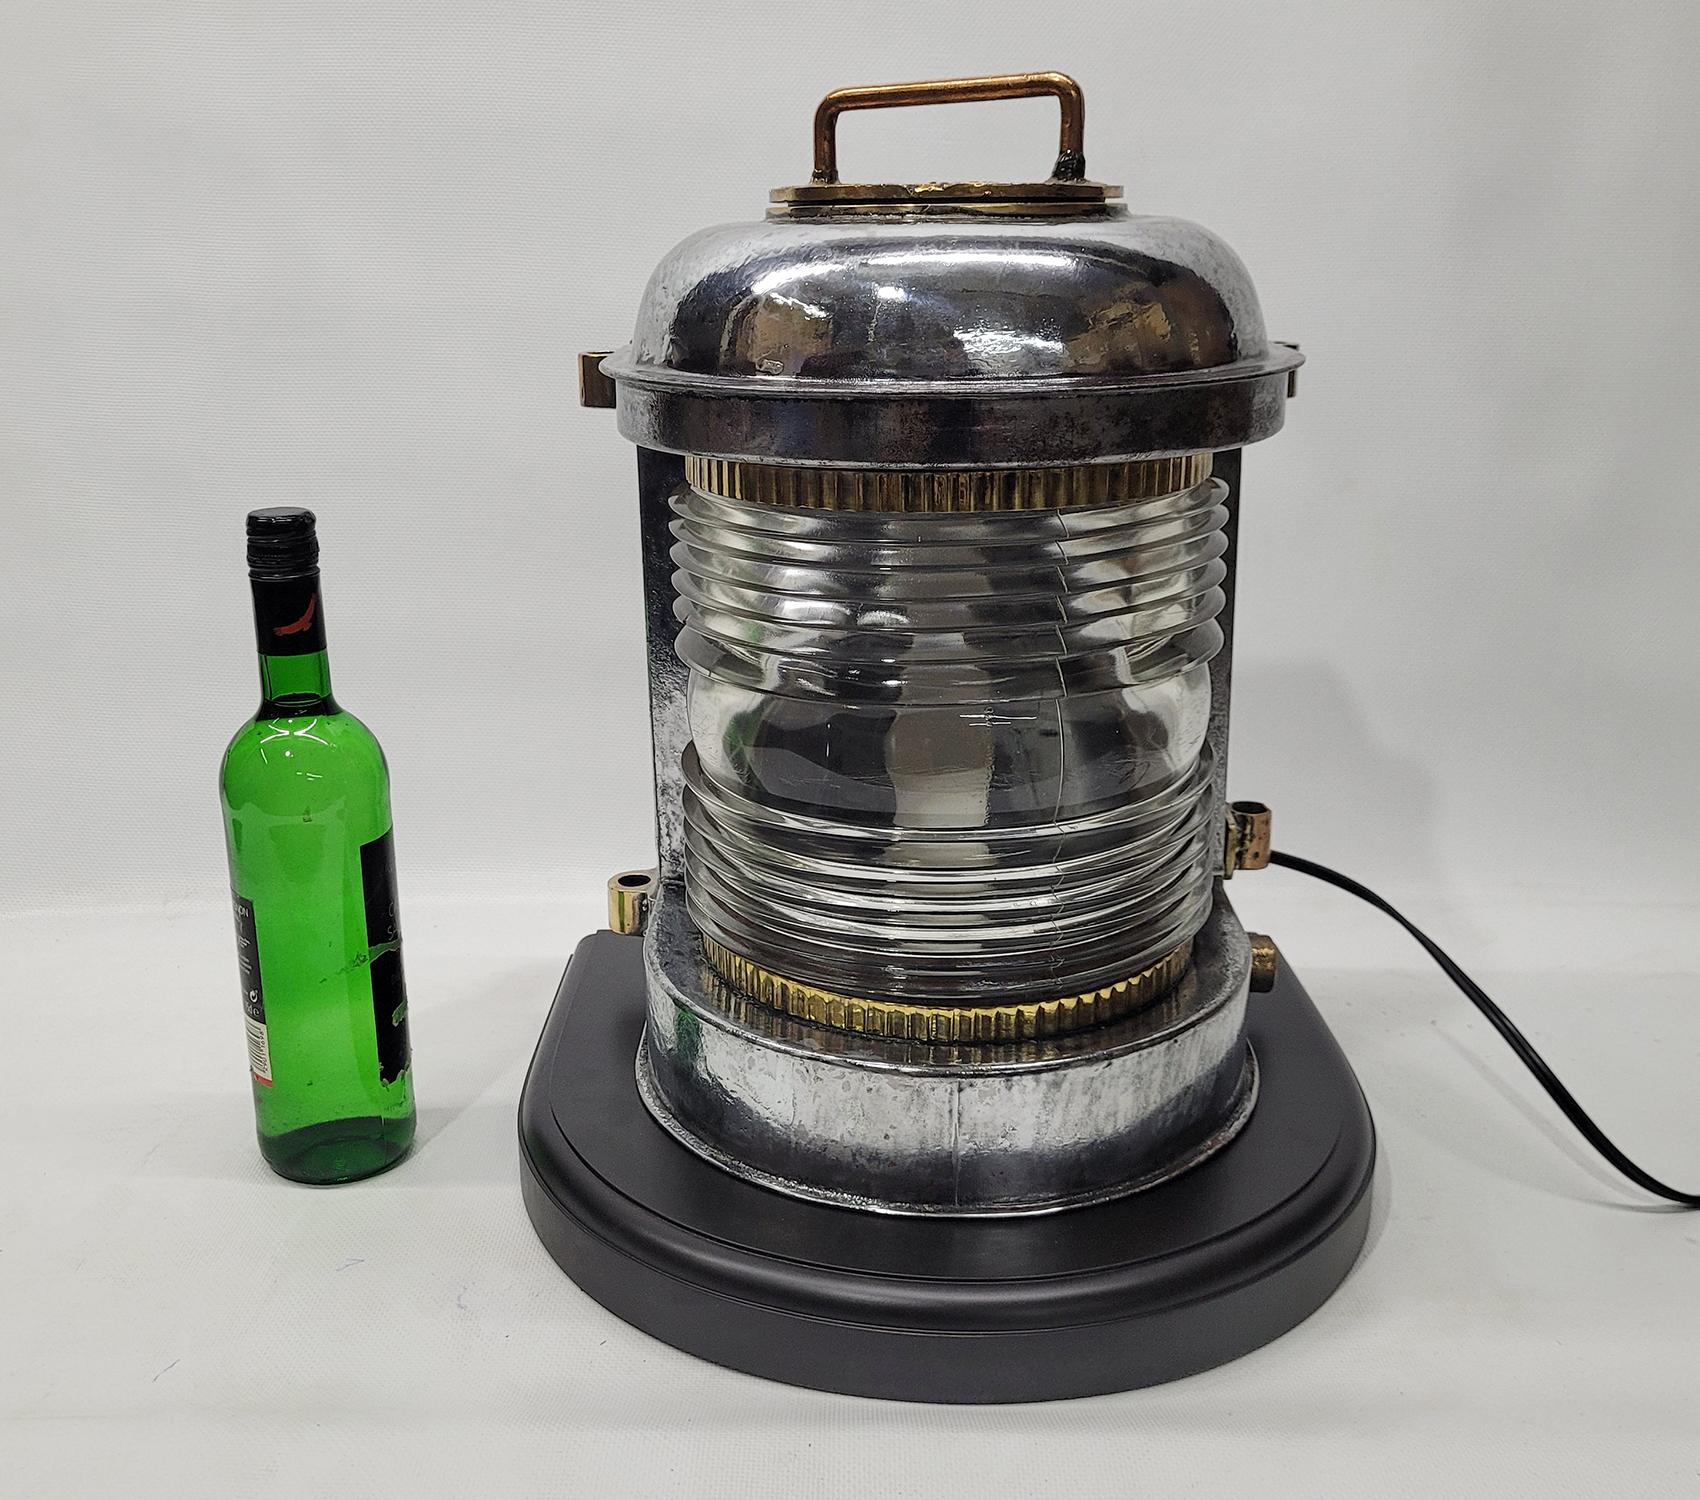 Polished steel ships masthead lantern by Durkee Marine. Glass Fresnel lens with brass trim. Brass cap with carry handle. Mounted to a wood base. Rewired with electric socket. Note: There is a dent on rear corner at bottom. Look at photos.

Weight: